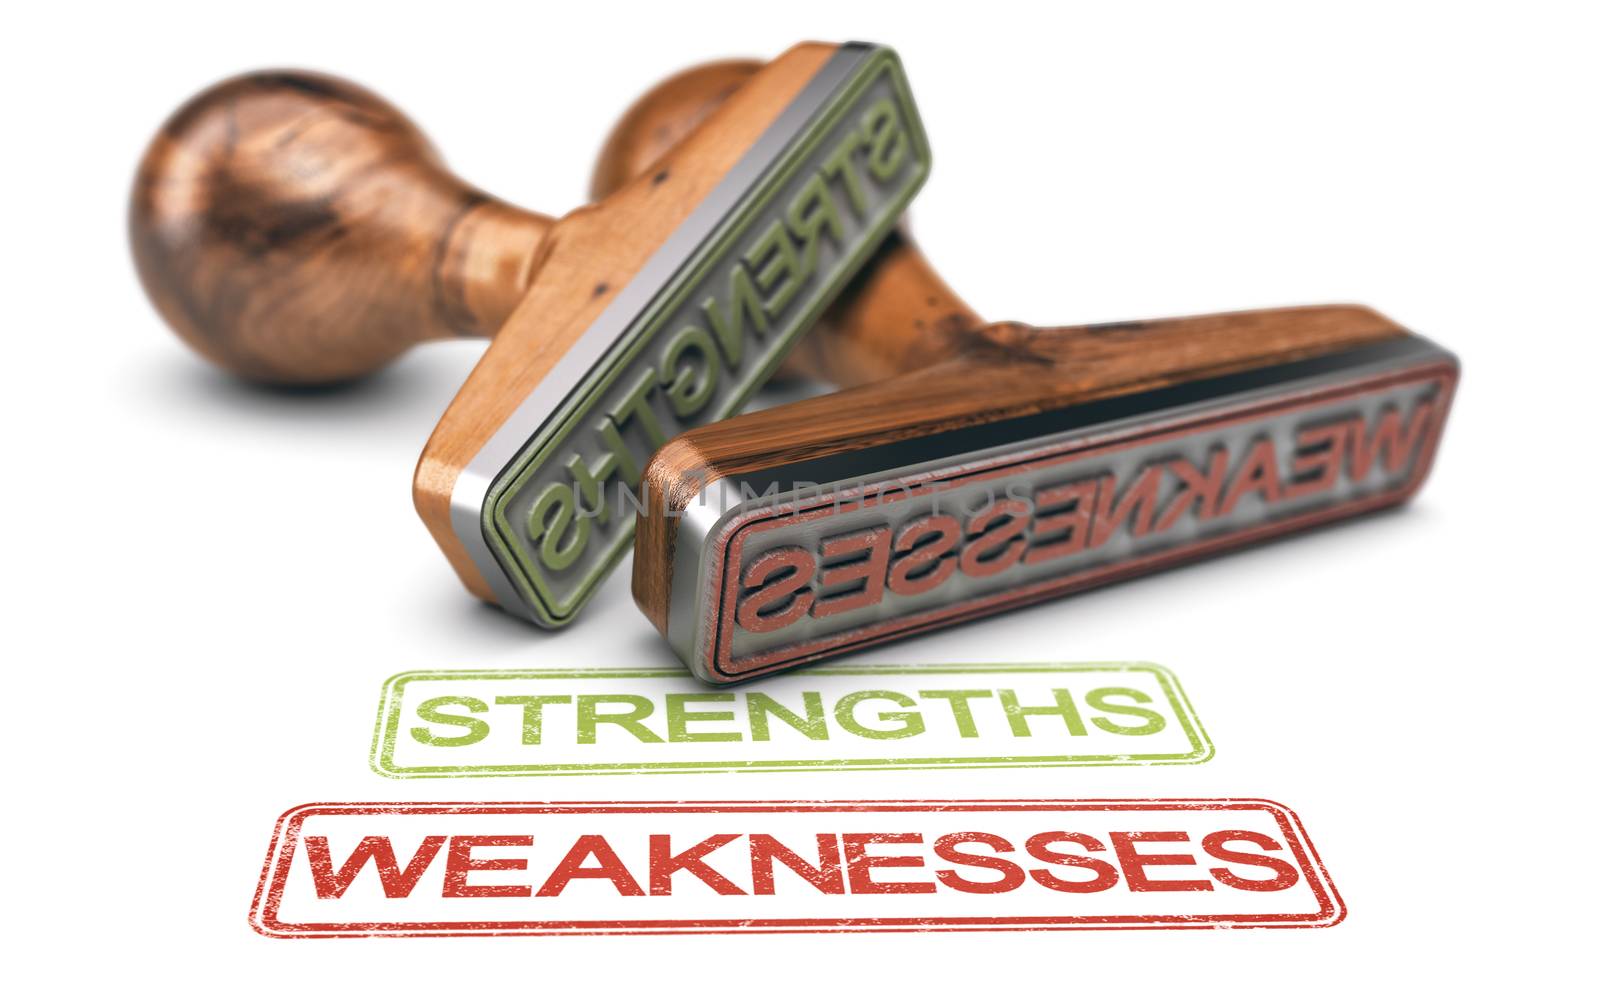 Strengths and Weaknesses Words And Two Rubber Stamps Over white  by Olivier-Le-Moal